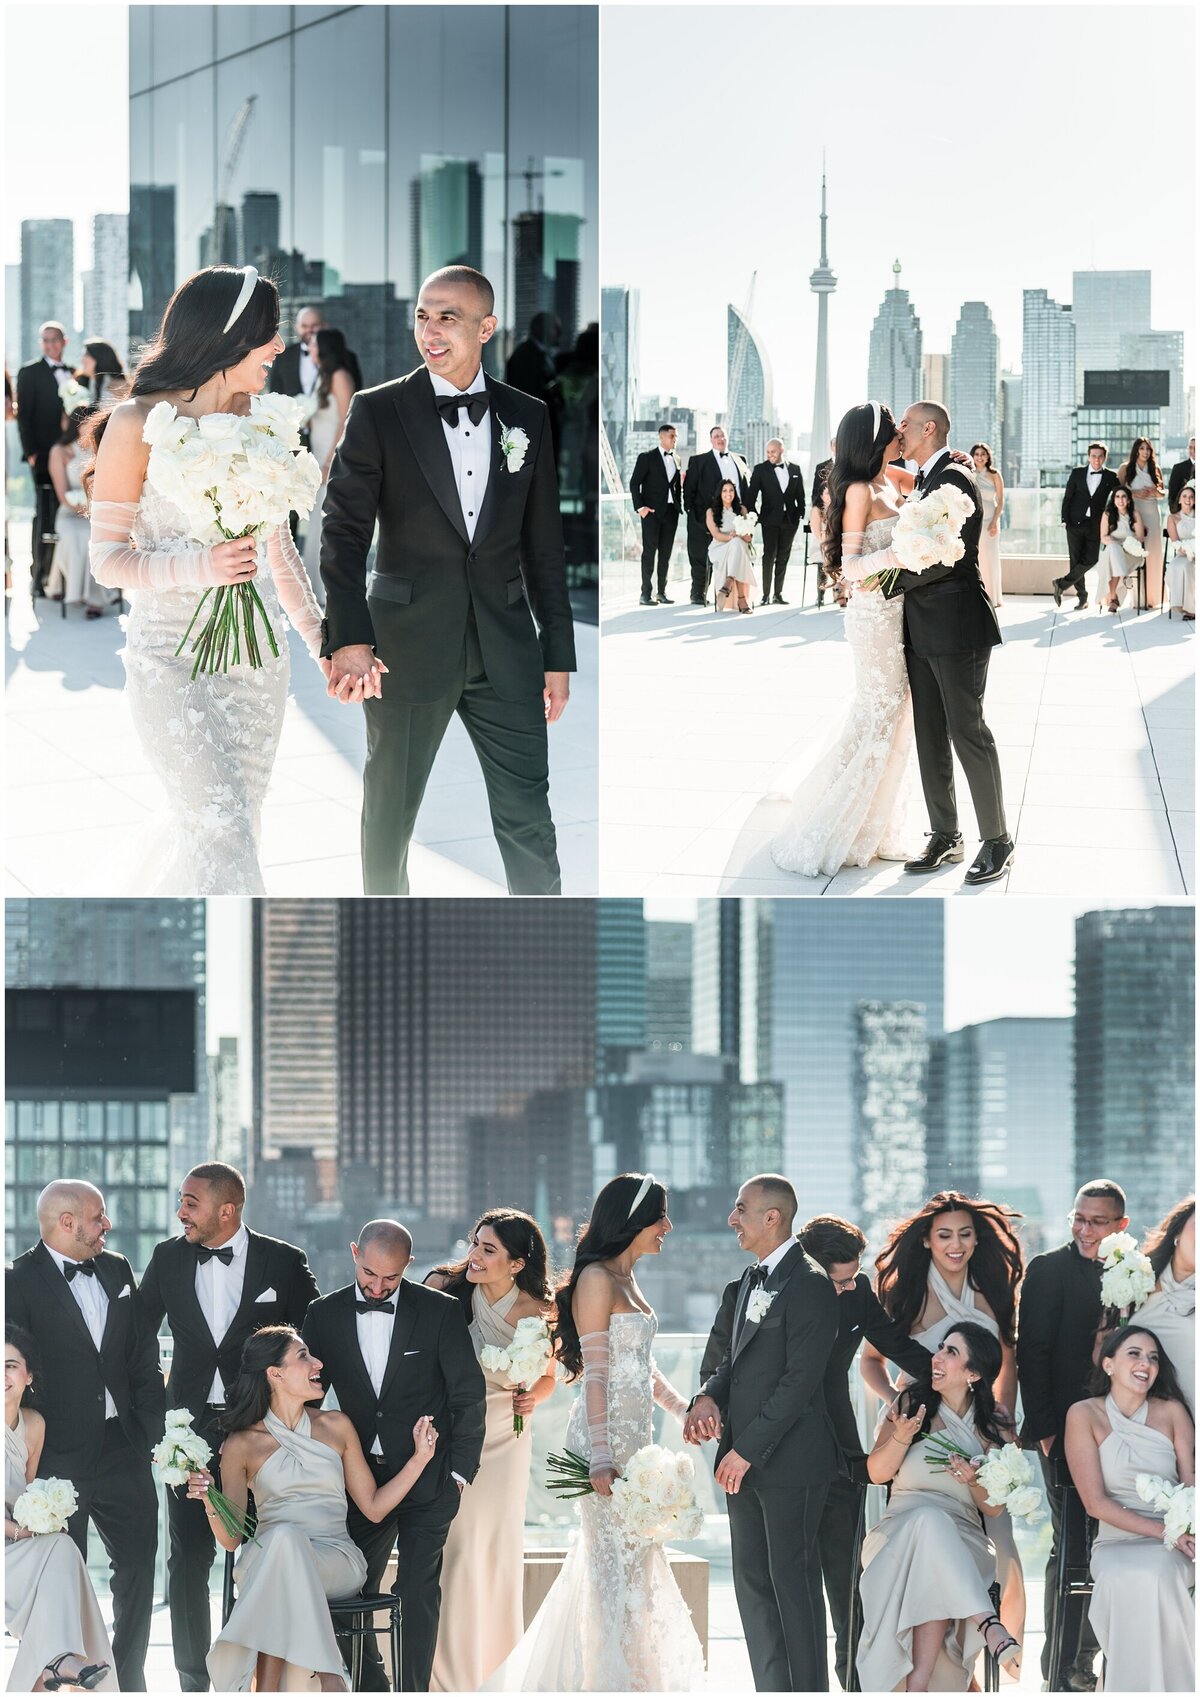 Epic wedding party and bride and groom portraits at The Globe and Mail with Toronto Skyline in the background